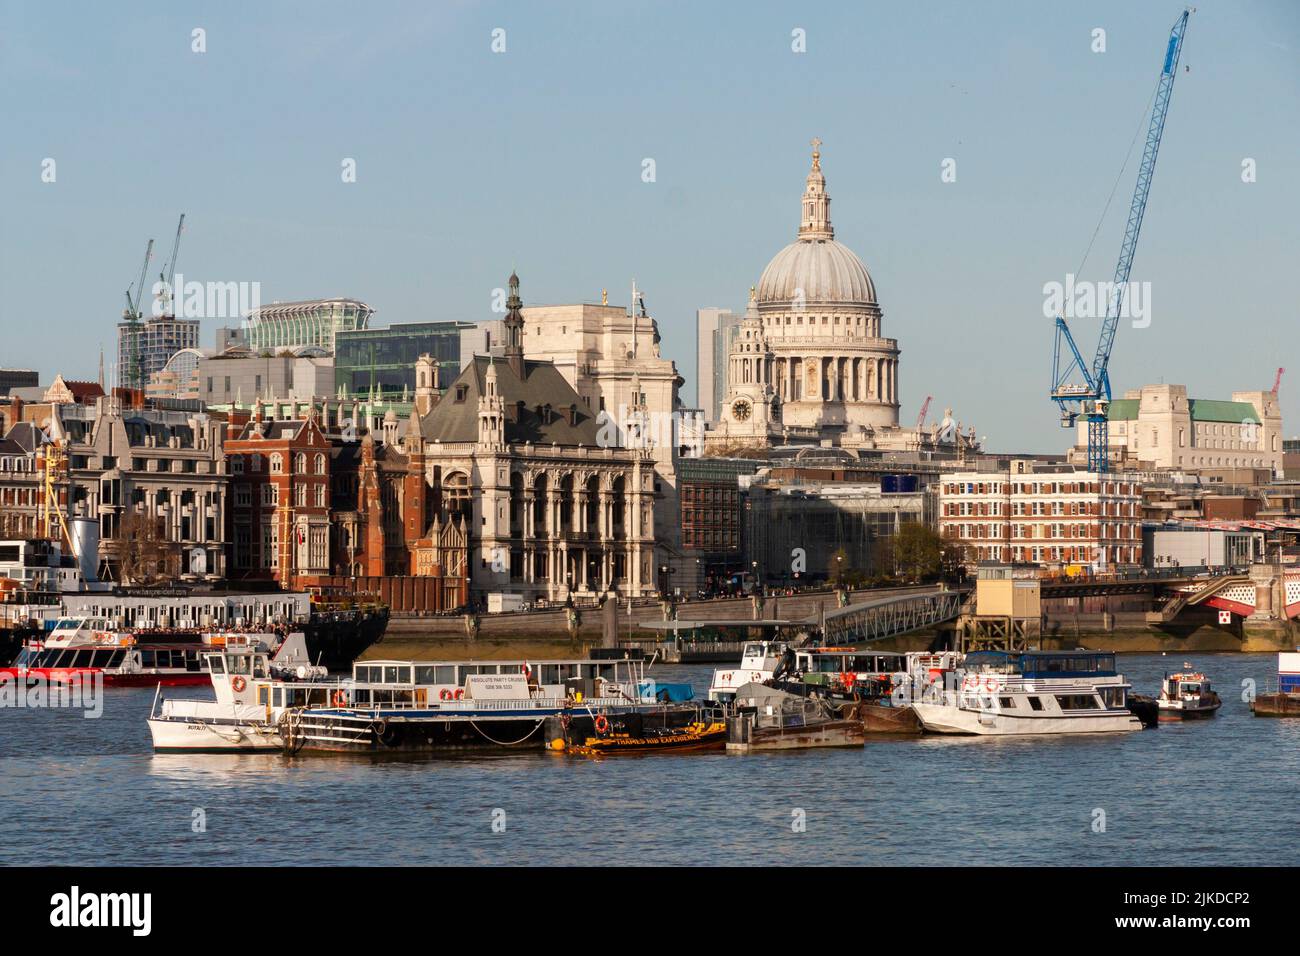 London, England - Aril 1, 2012: The River Thames with ships and boats and the city of london with St. Paul's Cathedral and buildings. Stock Photo